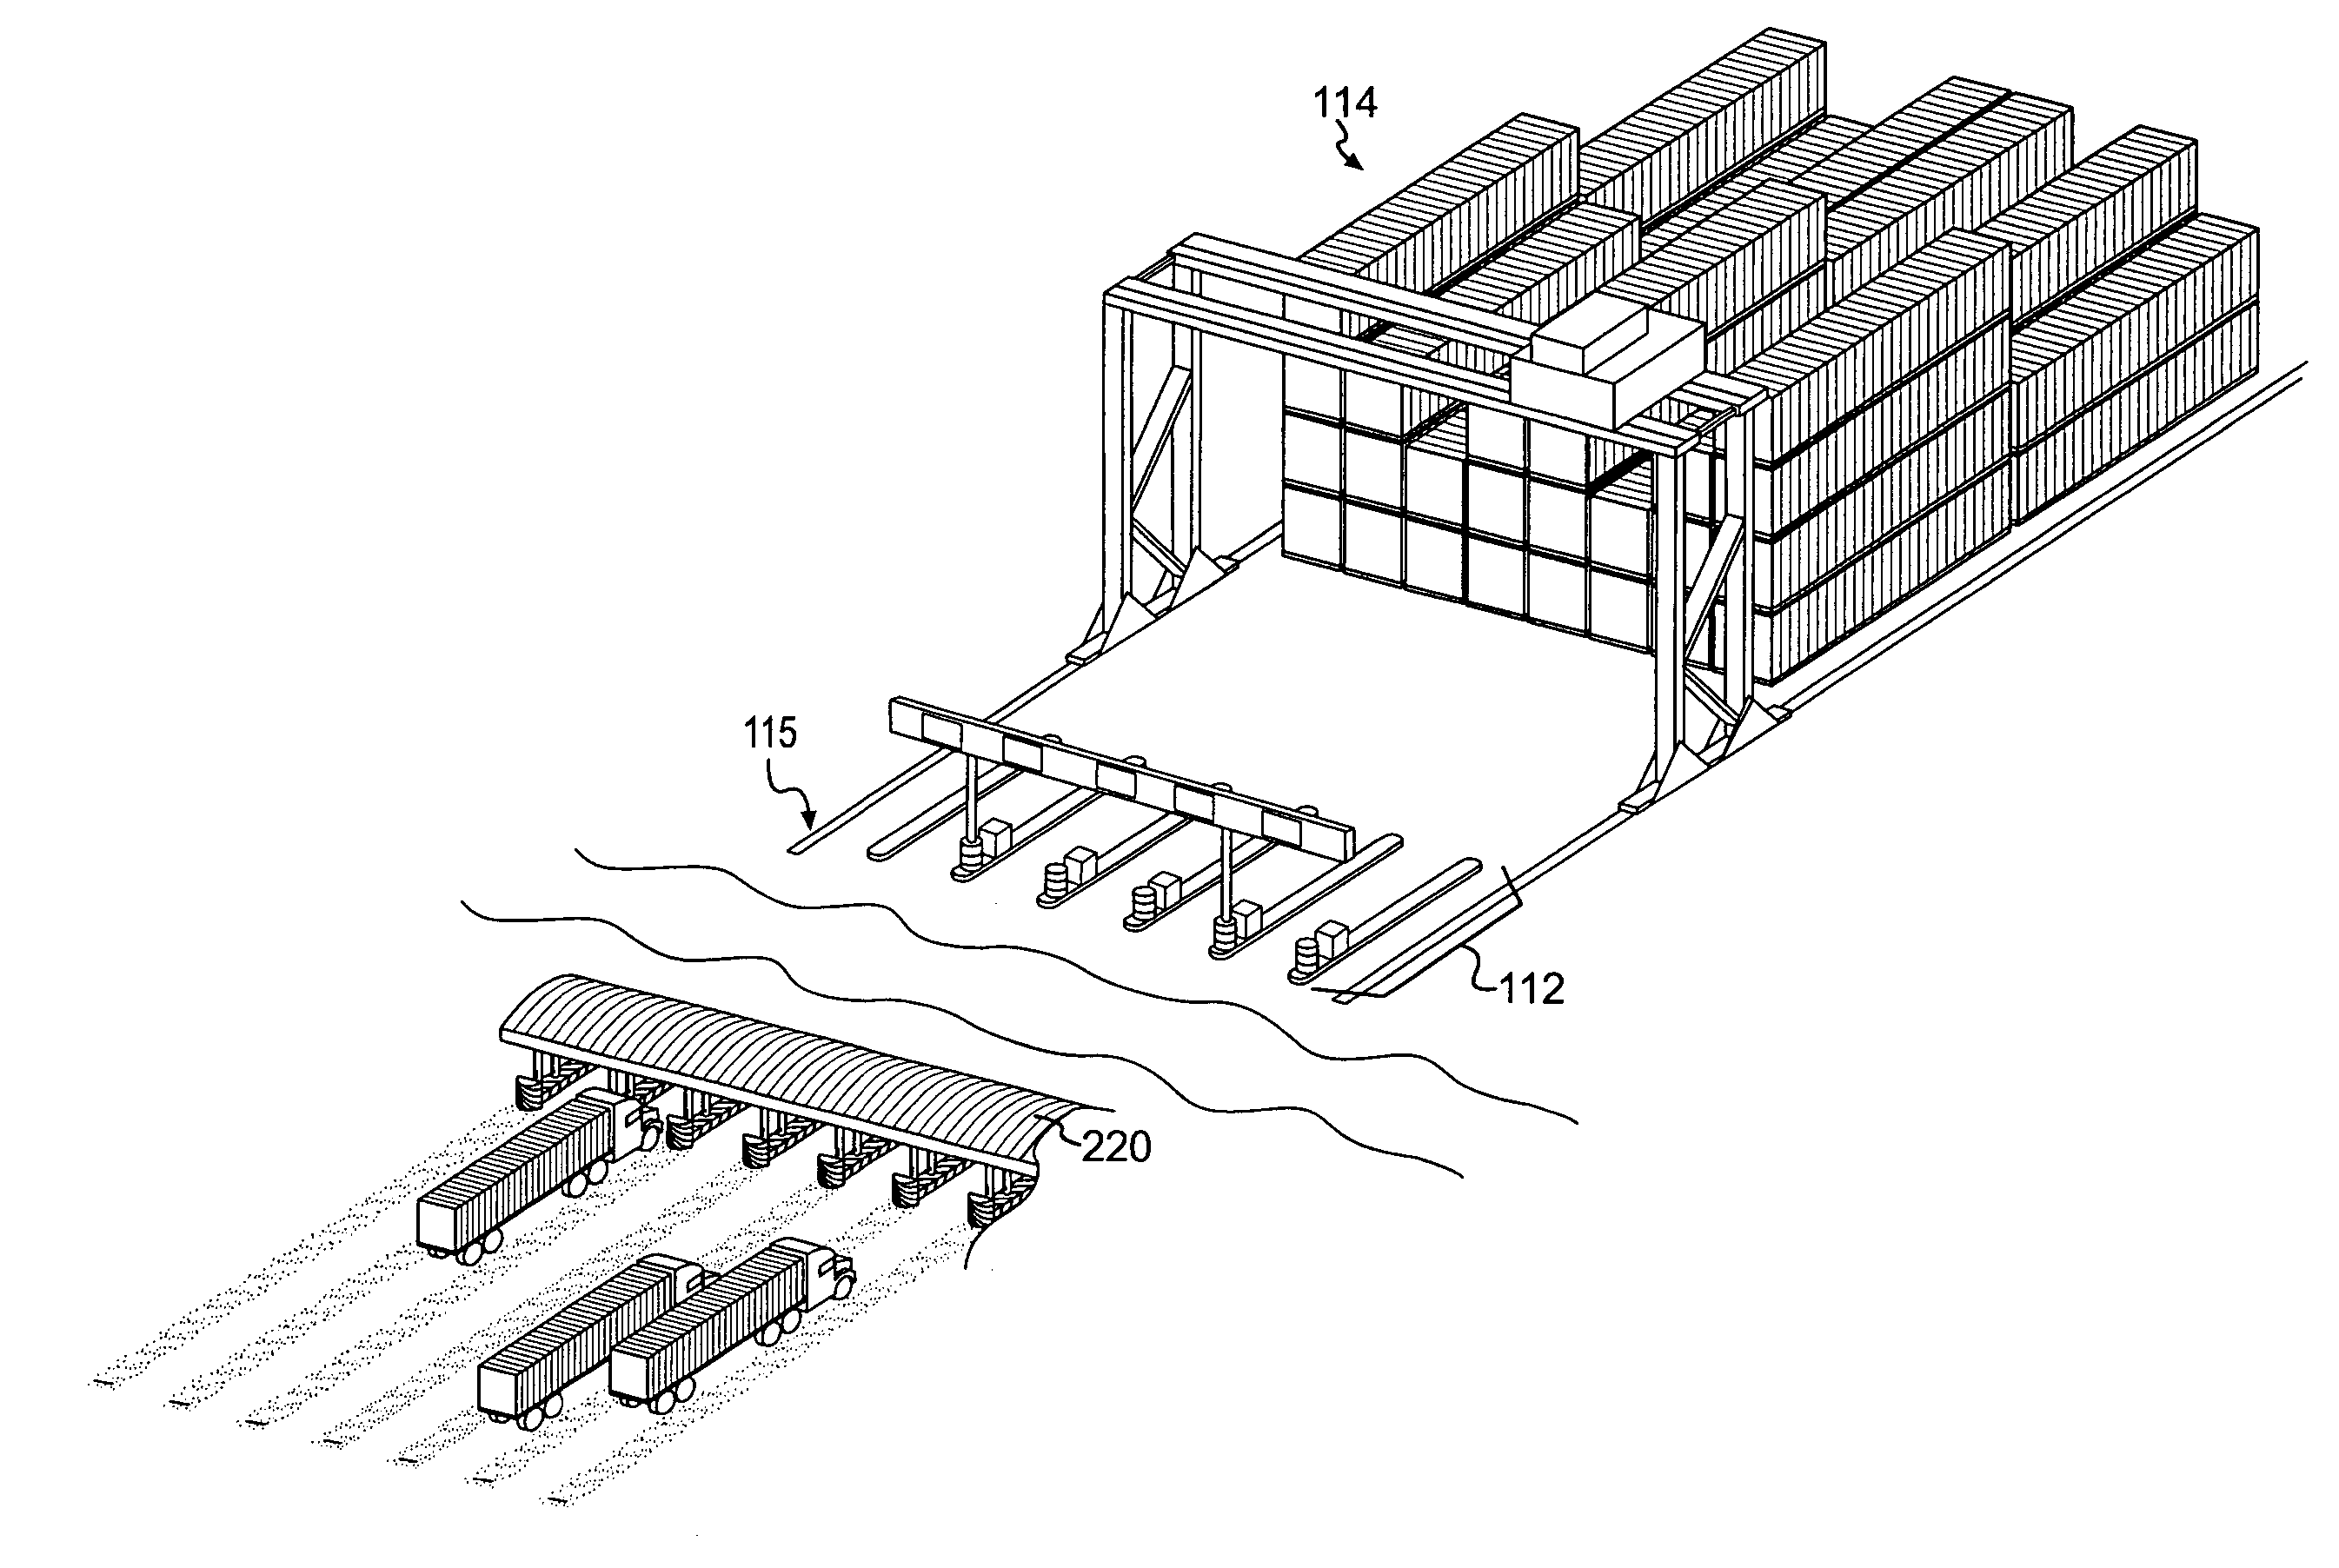 System and process for improving container flow in a port facility